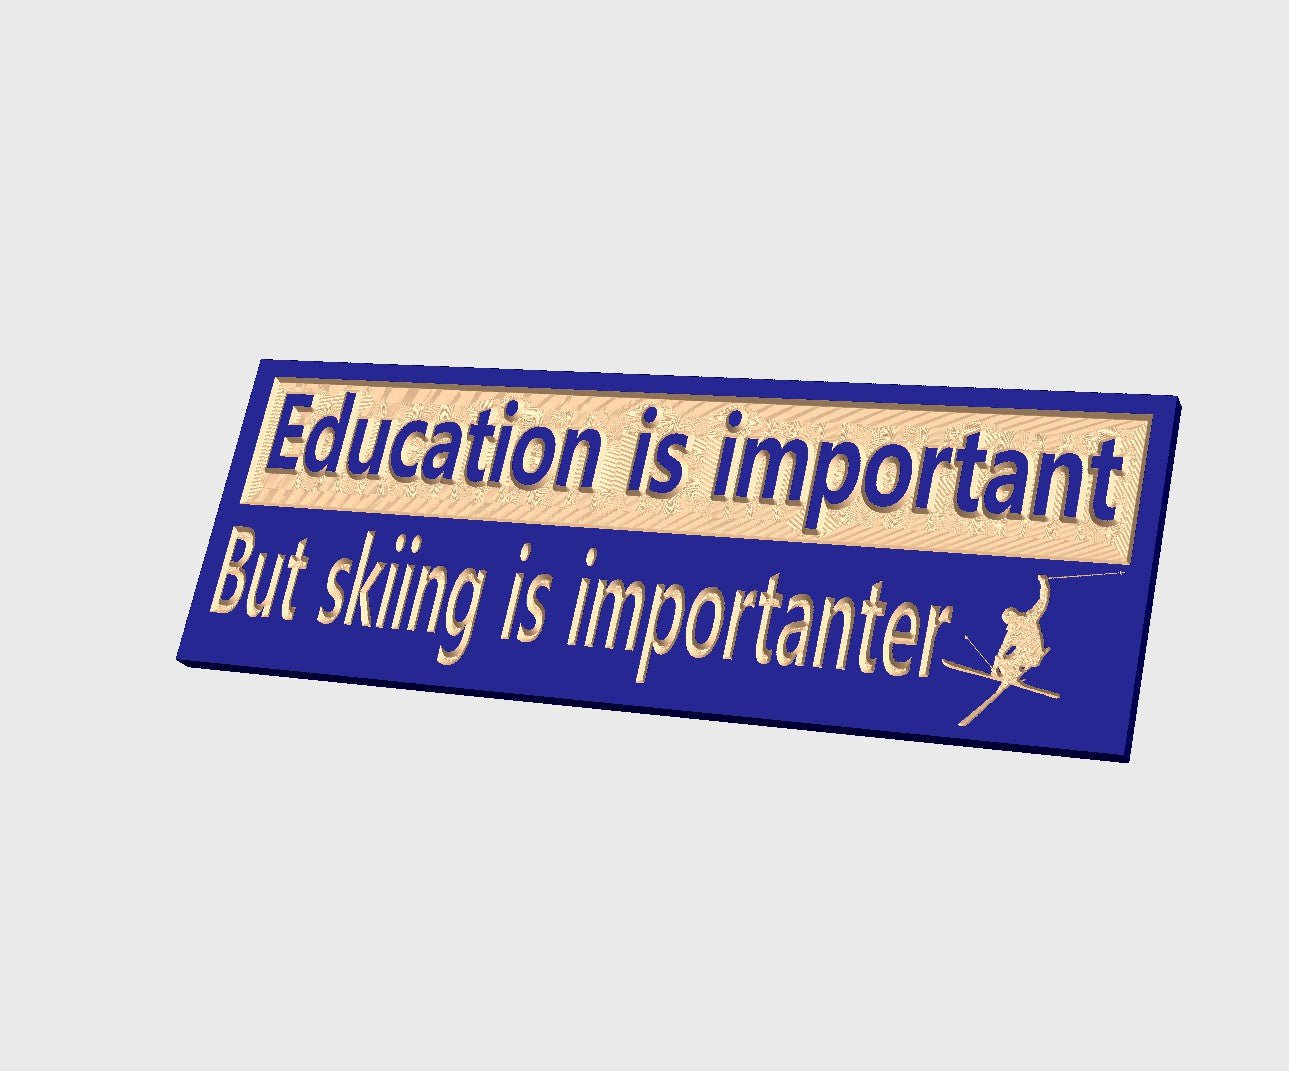 Education is important but skiing is importanter wood carved sign - Advent Wood Products